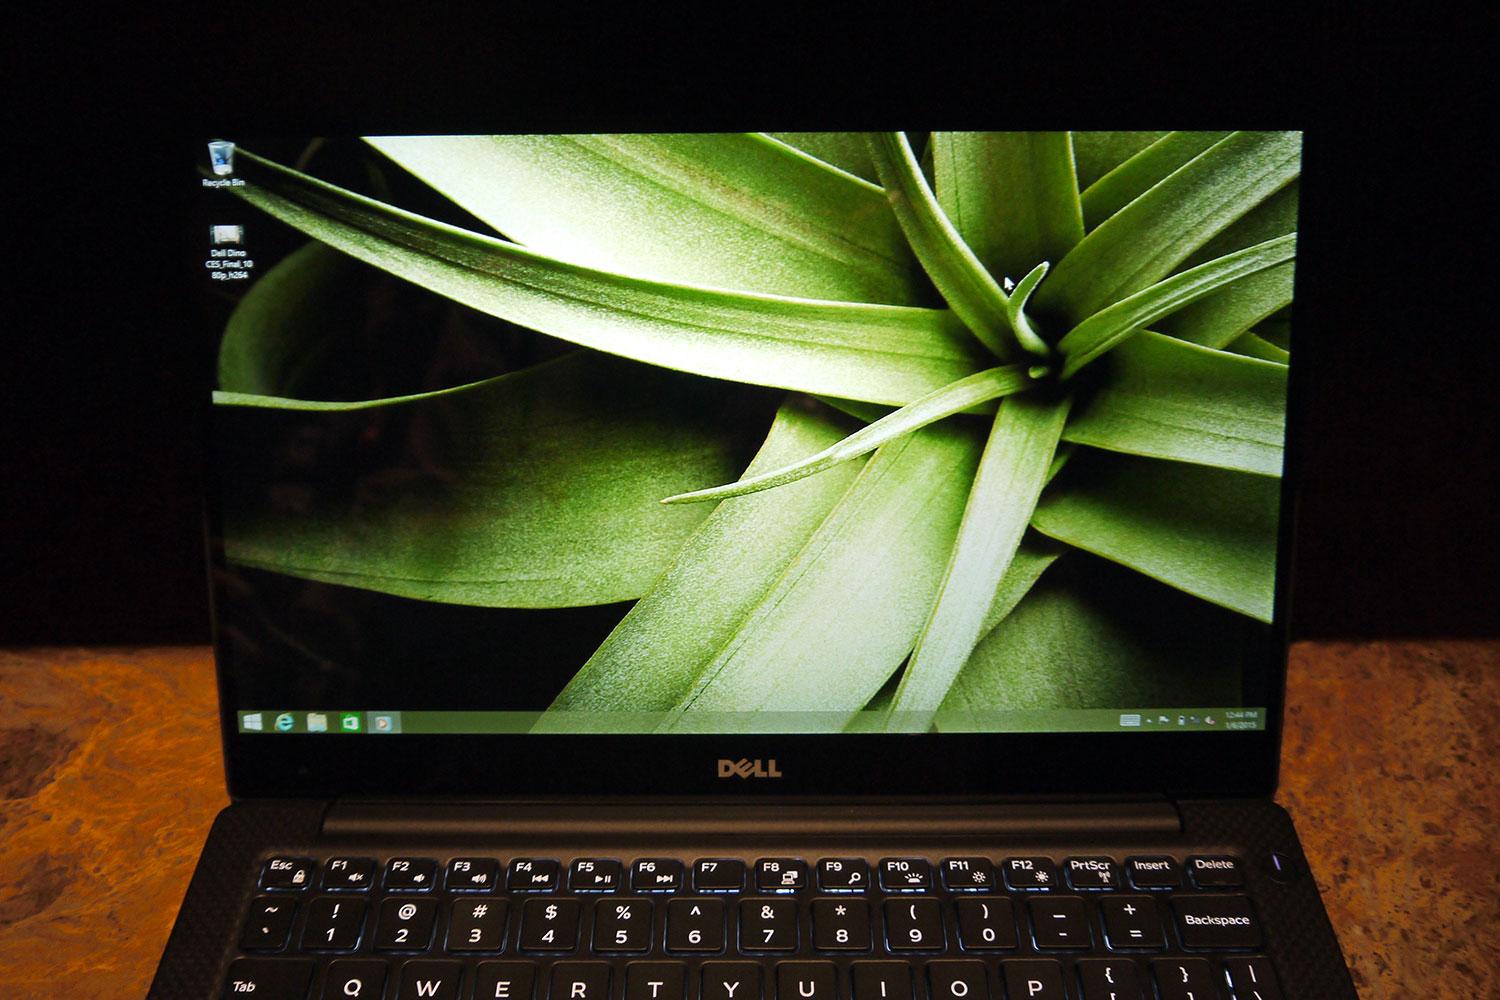 dell xps 13 laptop has a screen with virtually no bezel hands on p1100332